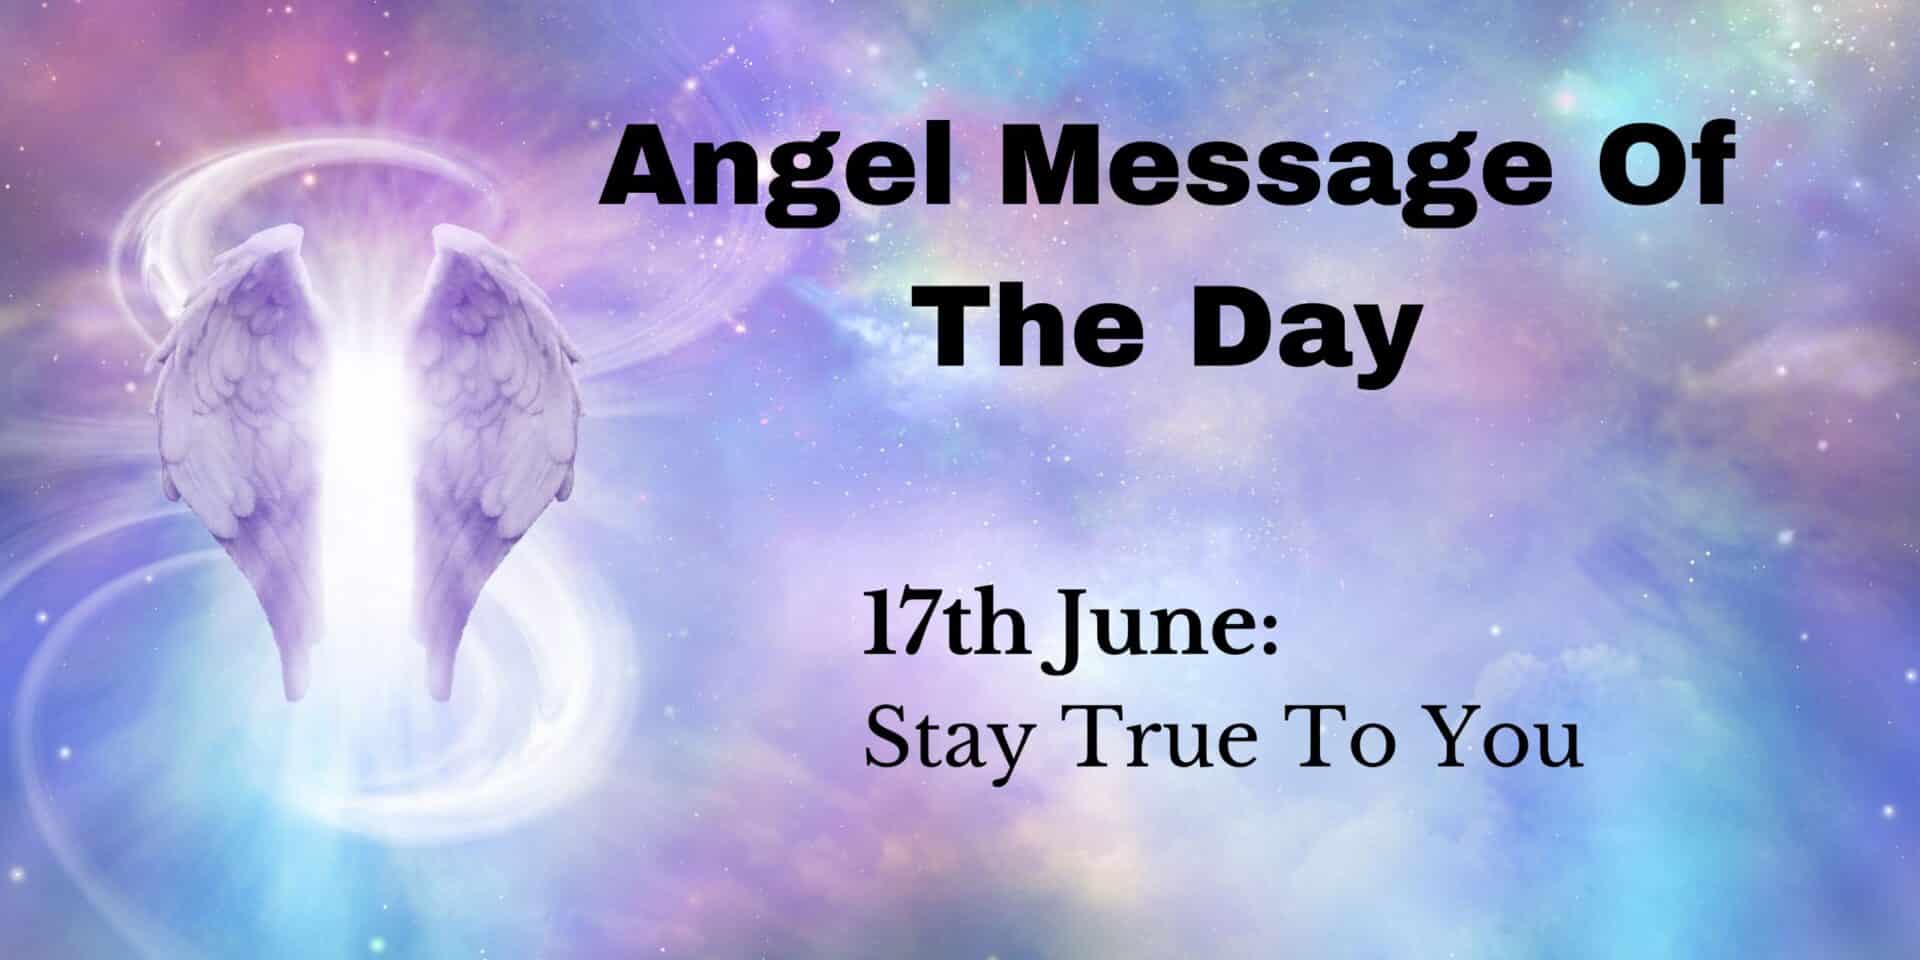 angel message of the day : stay true to you